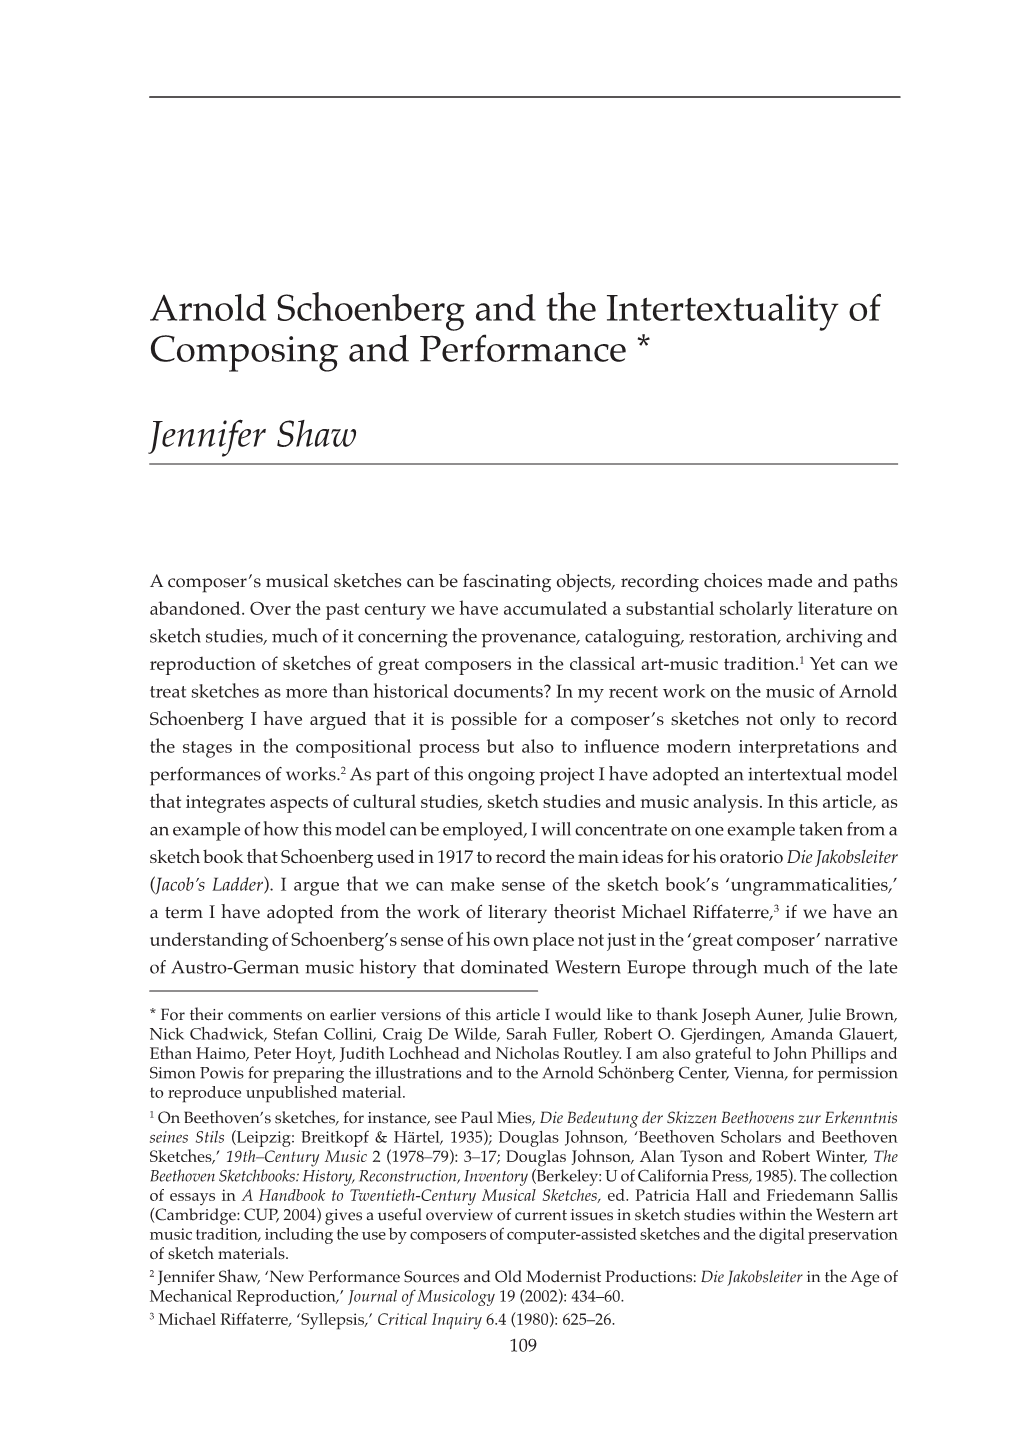 Arnold Schoenberg and the Intertextuality of Composing and Performance *